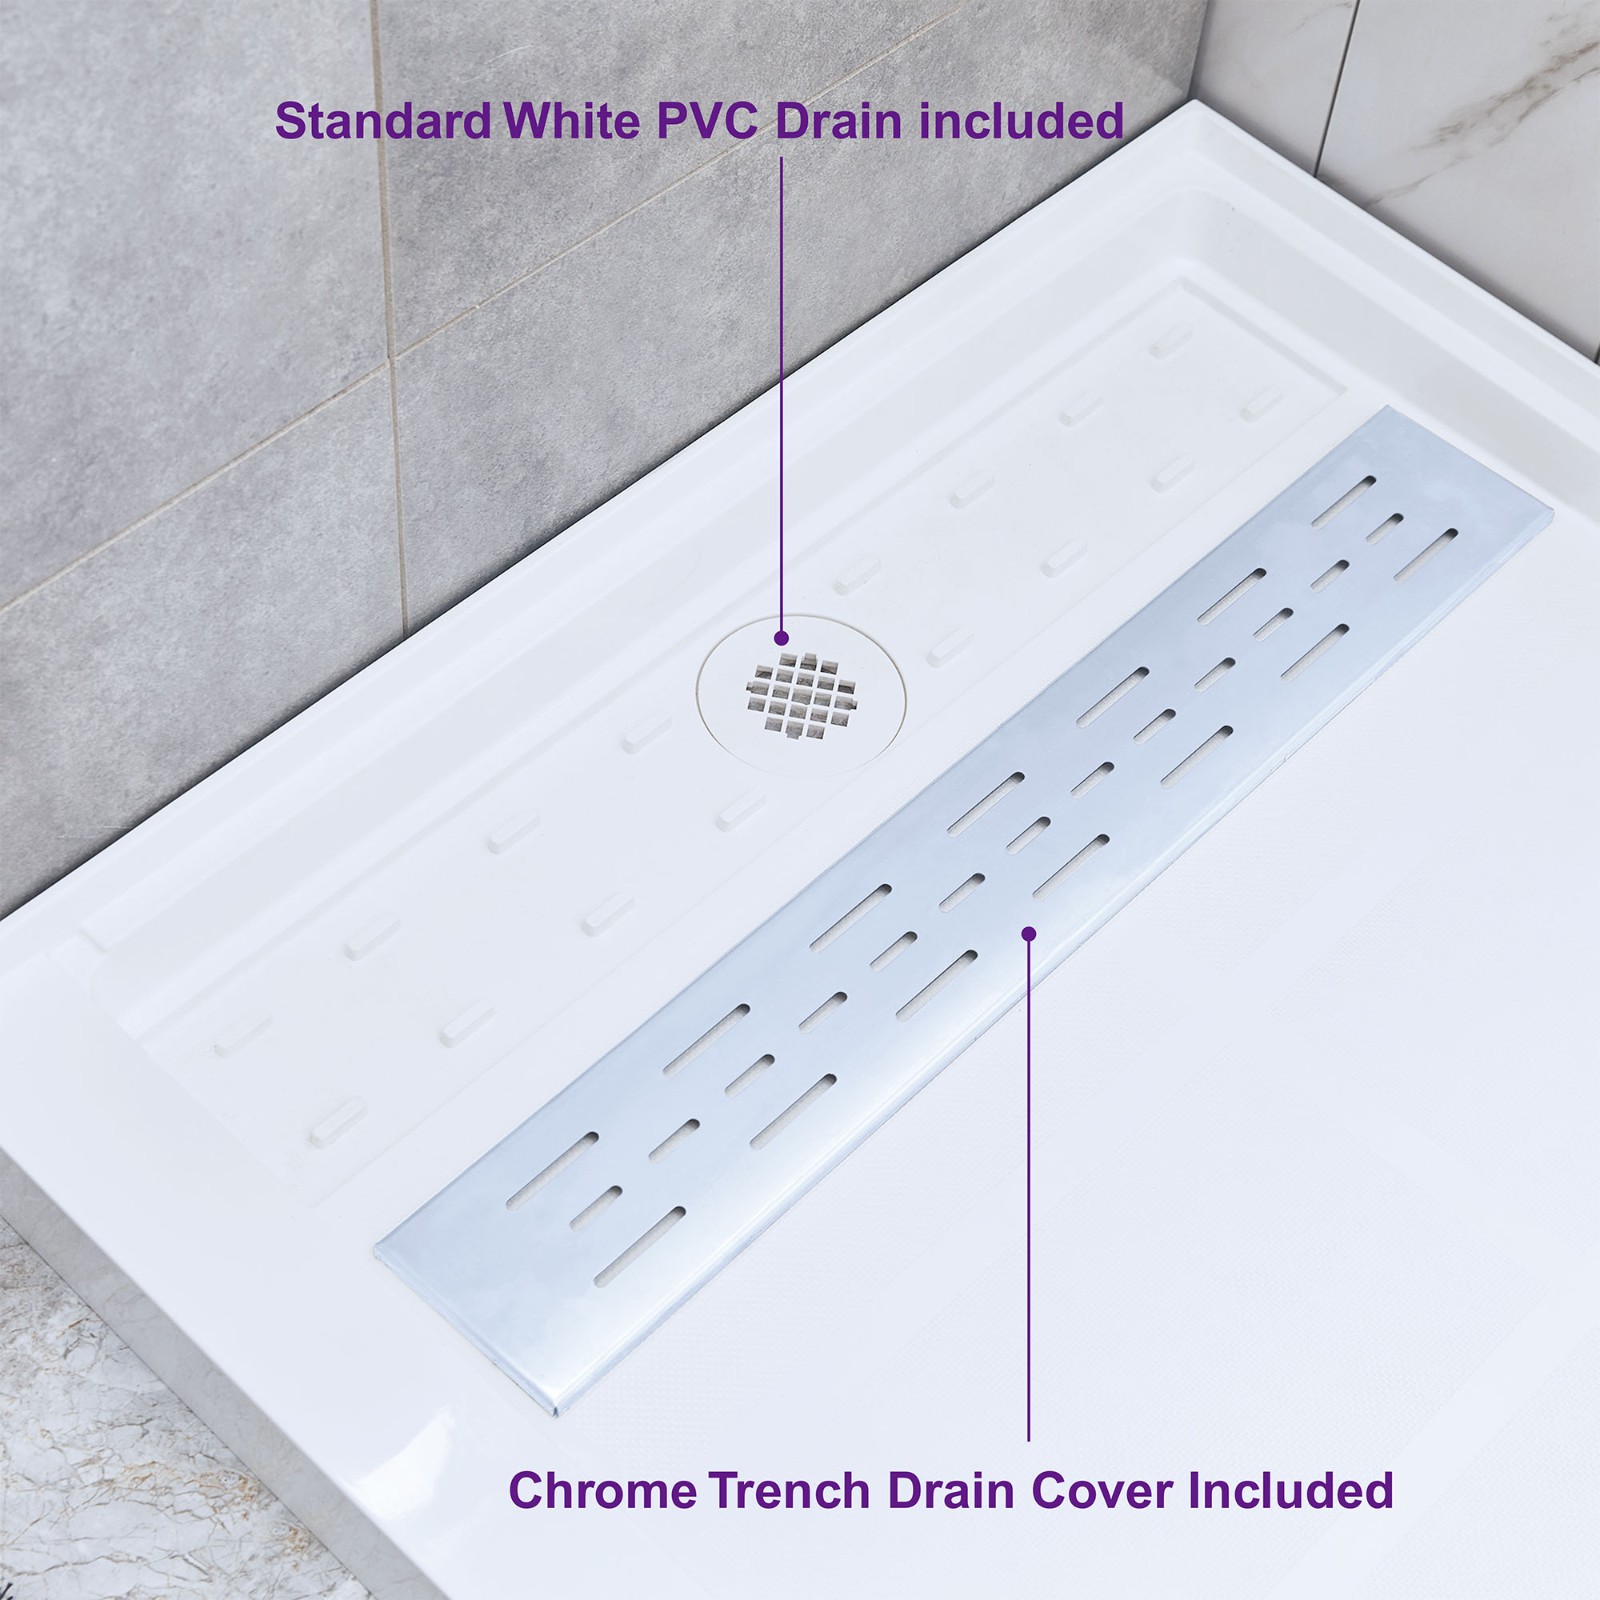  WOODBRIDGE SBR4836-1000R-CH SolidSurface Shower Base with Recessed Trench Side Including  Chrome Linear Cover, 48